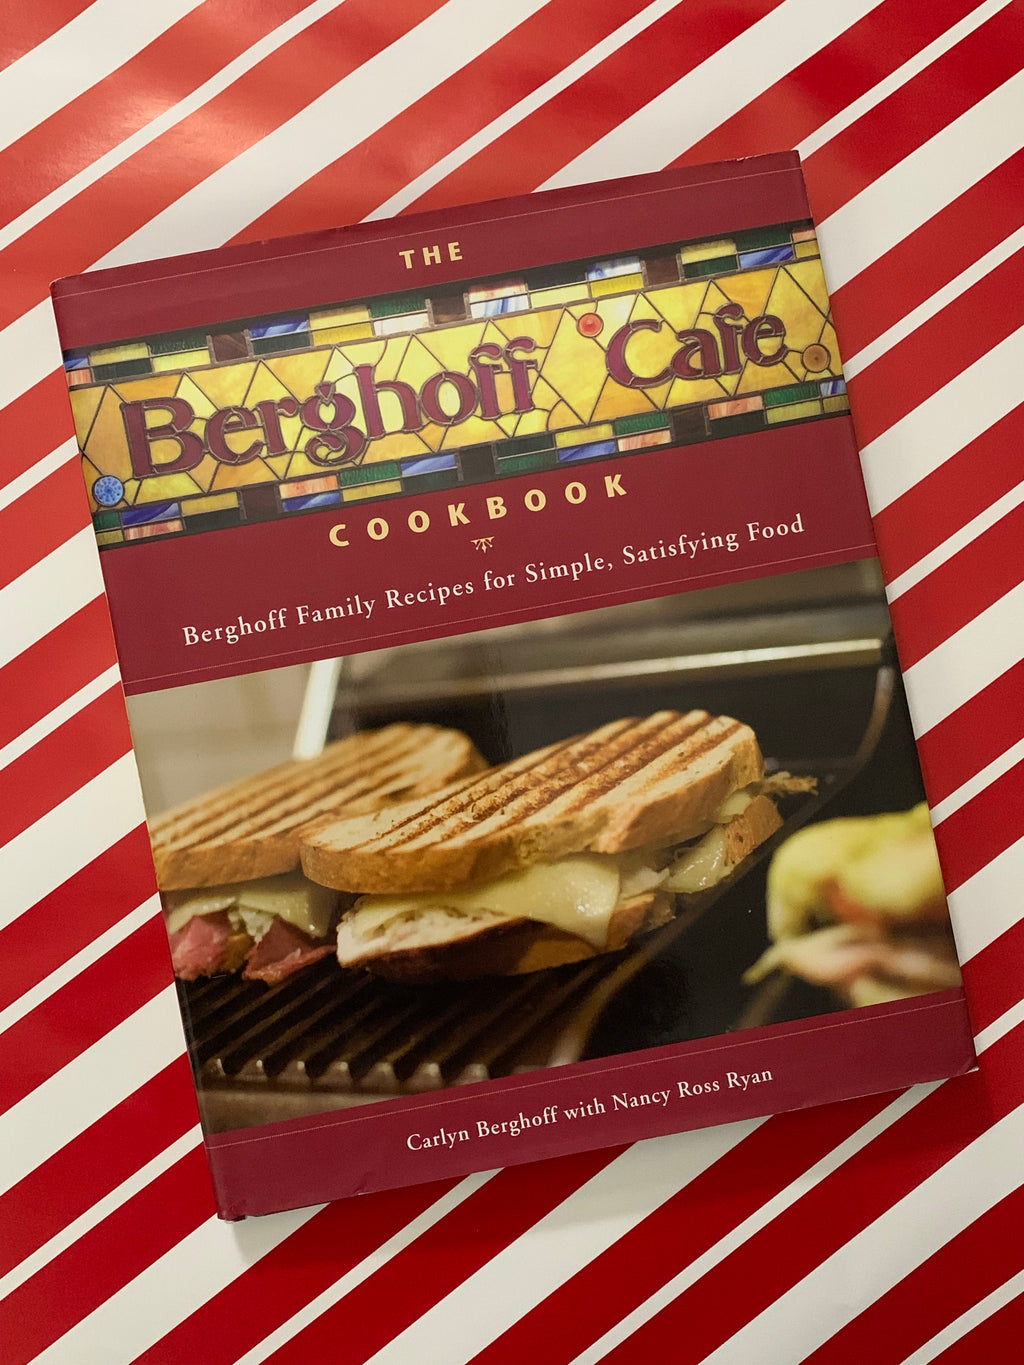 Berghoff Cafe Cookbook- By Carlyn Berghoff with Nancy Ross Ryan